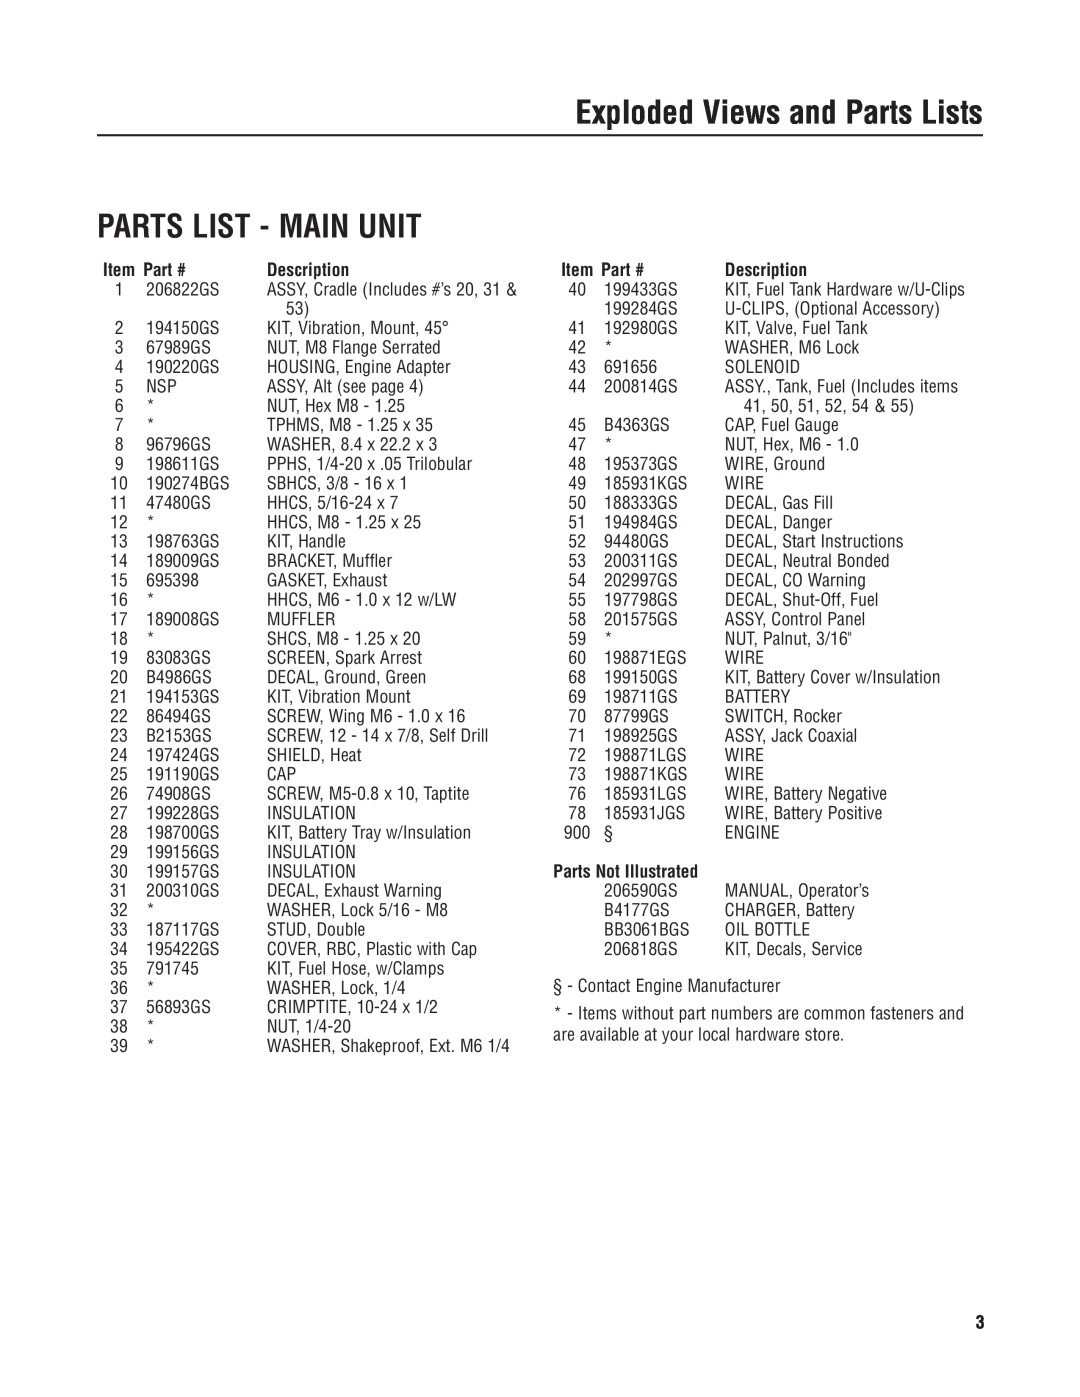 Briggs & Stratton 030380 manual Parts List - Main Unit, Description, Parts Not Illustrated, Exploded Views and Parts Lists 